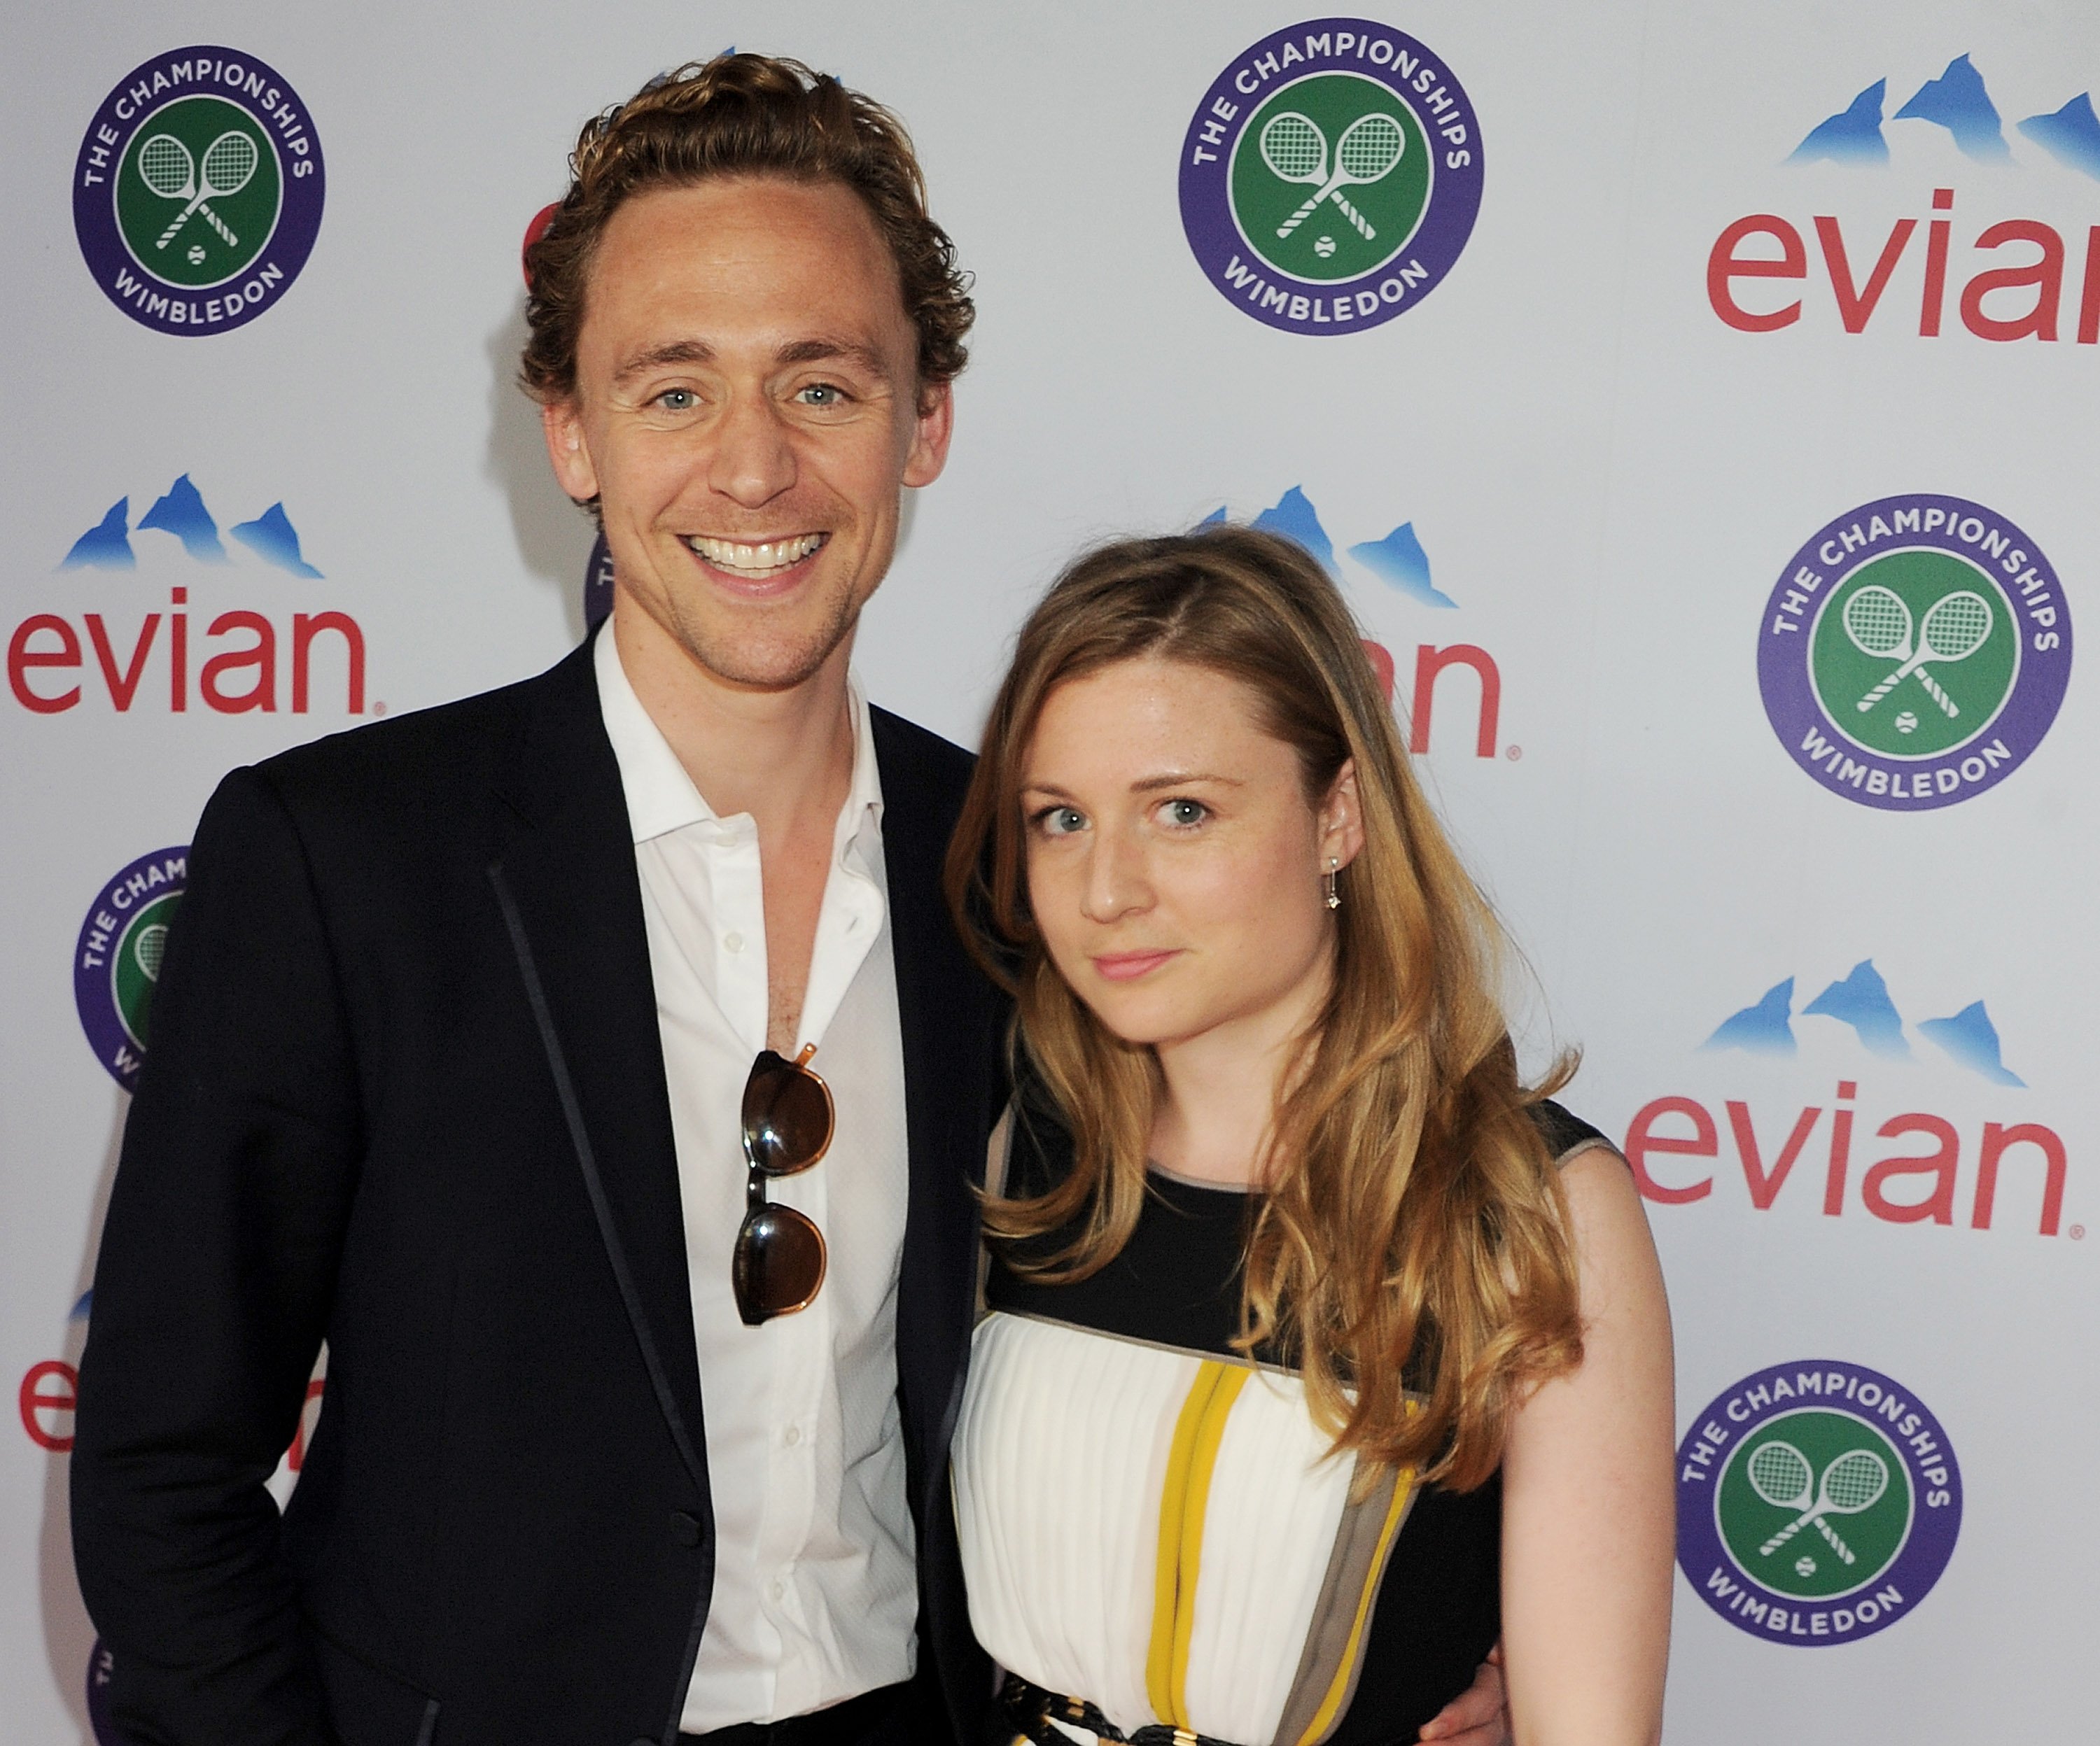 Tom Hiddleston and Emma Hiddleston at the evian “Live young" VIP Suite at Wimbledon on June 25, 2012 in London. | Source: Getty Images